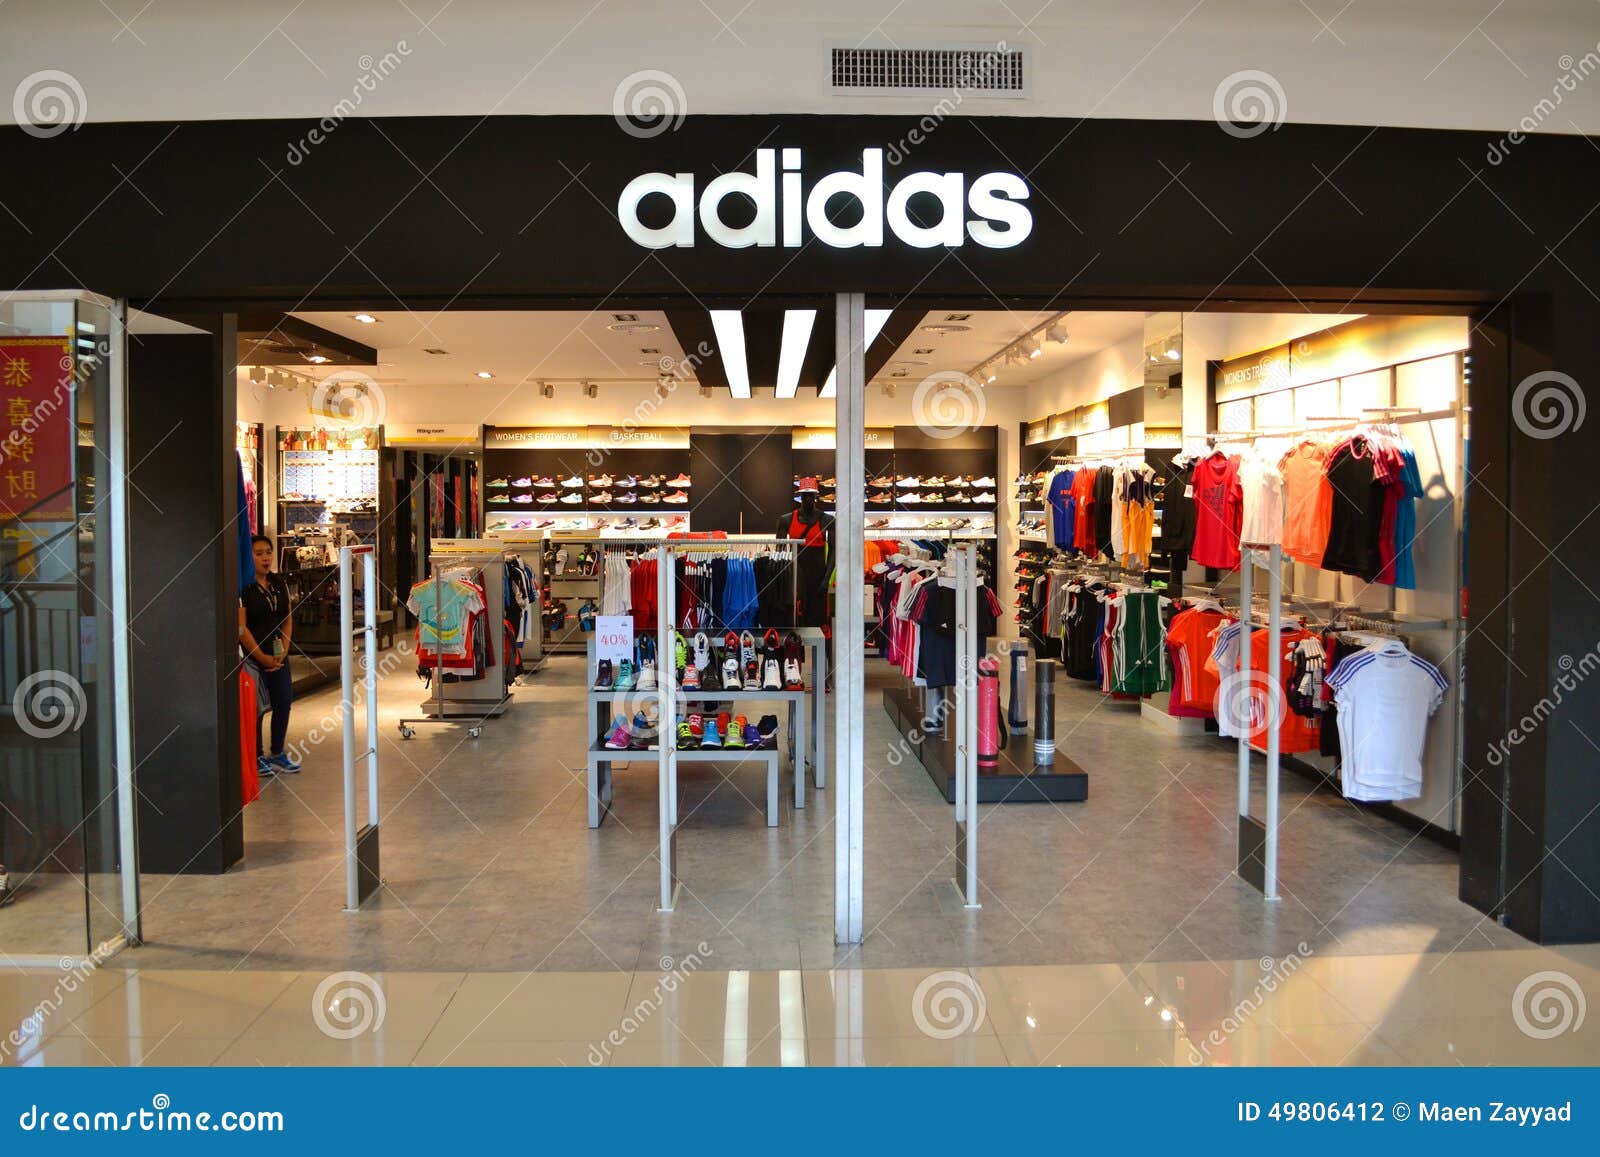 adidas in the mall